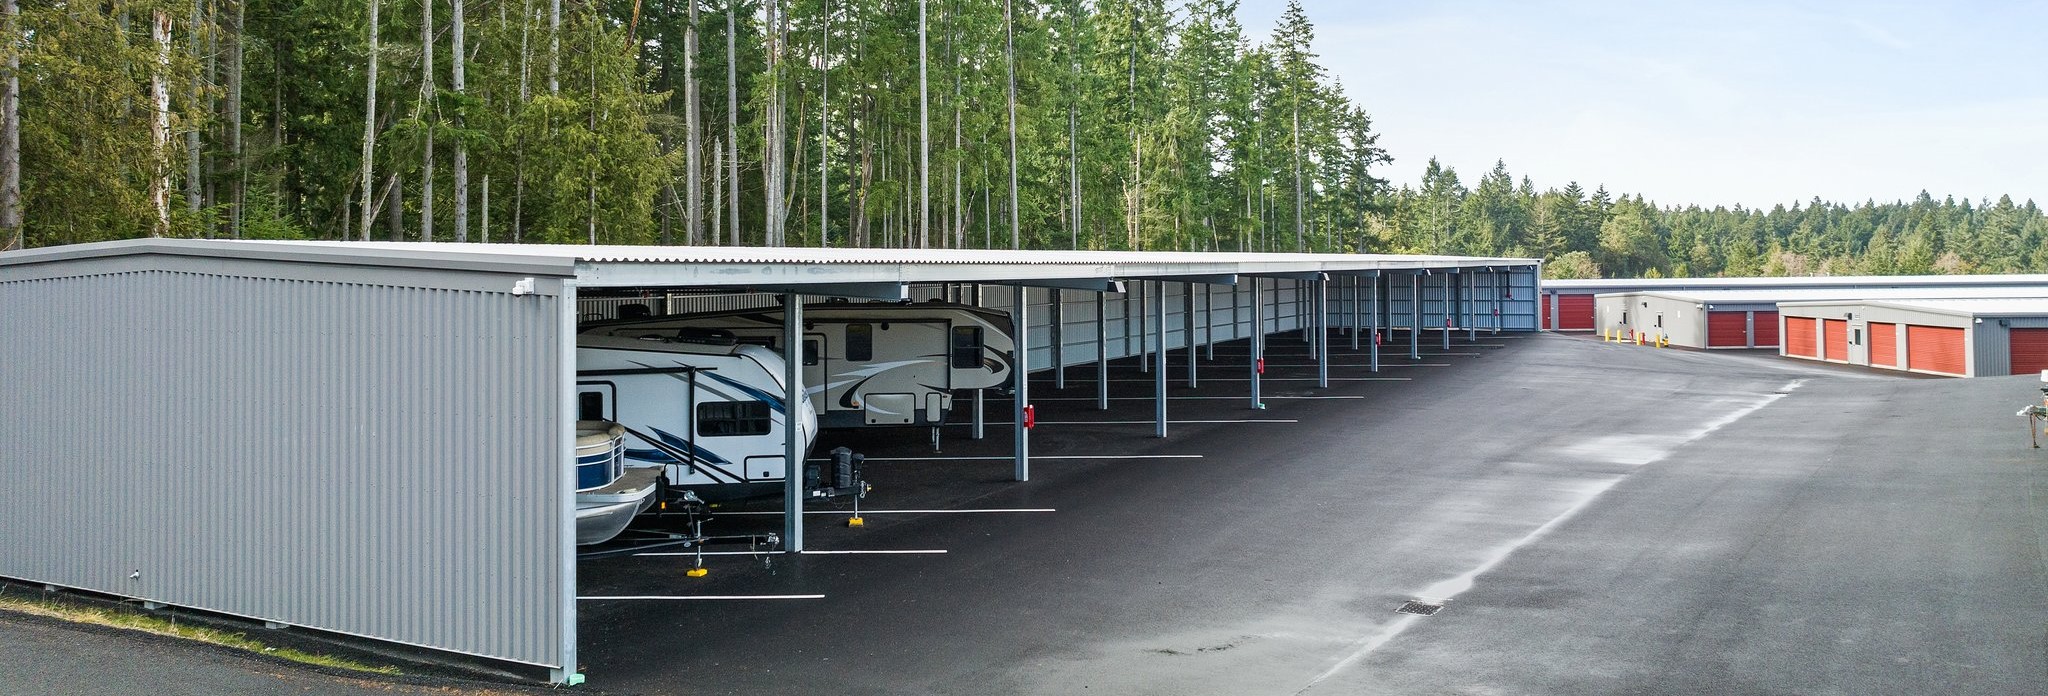 resized RV parking in Stor-it Here Gig Harbor,WA